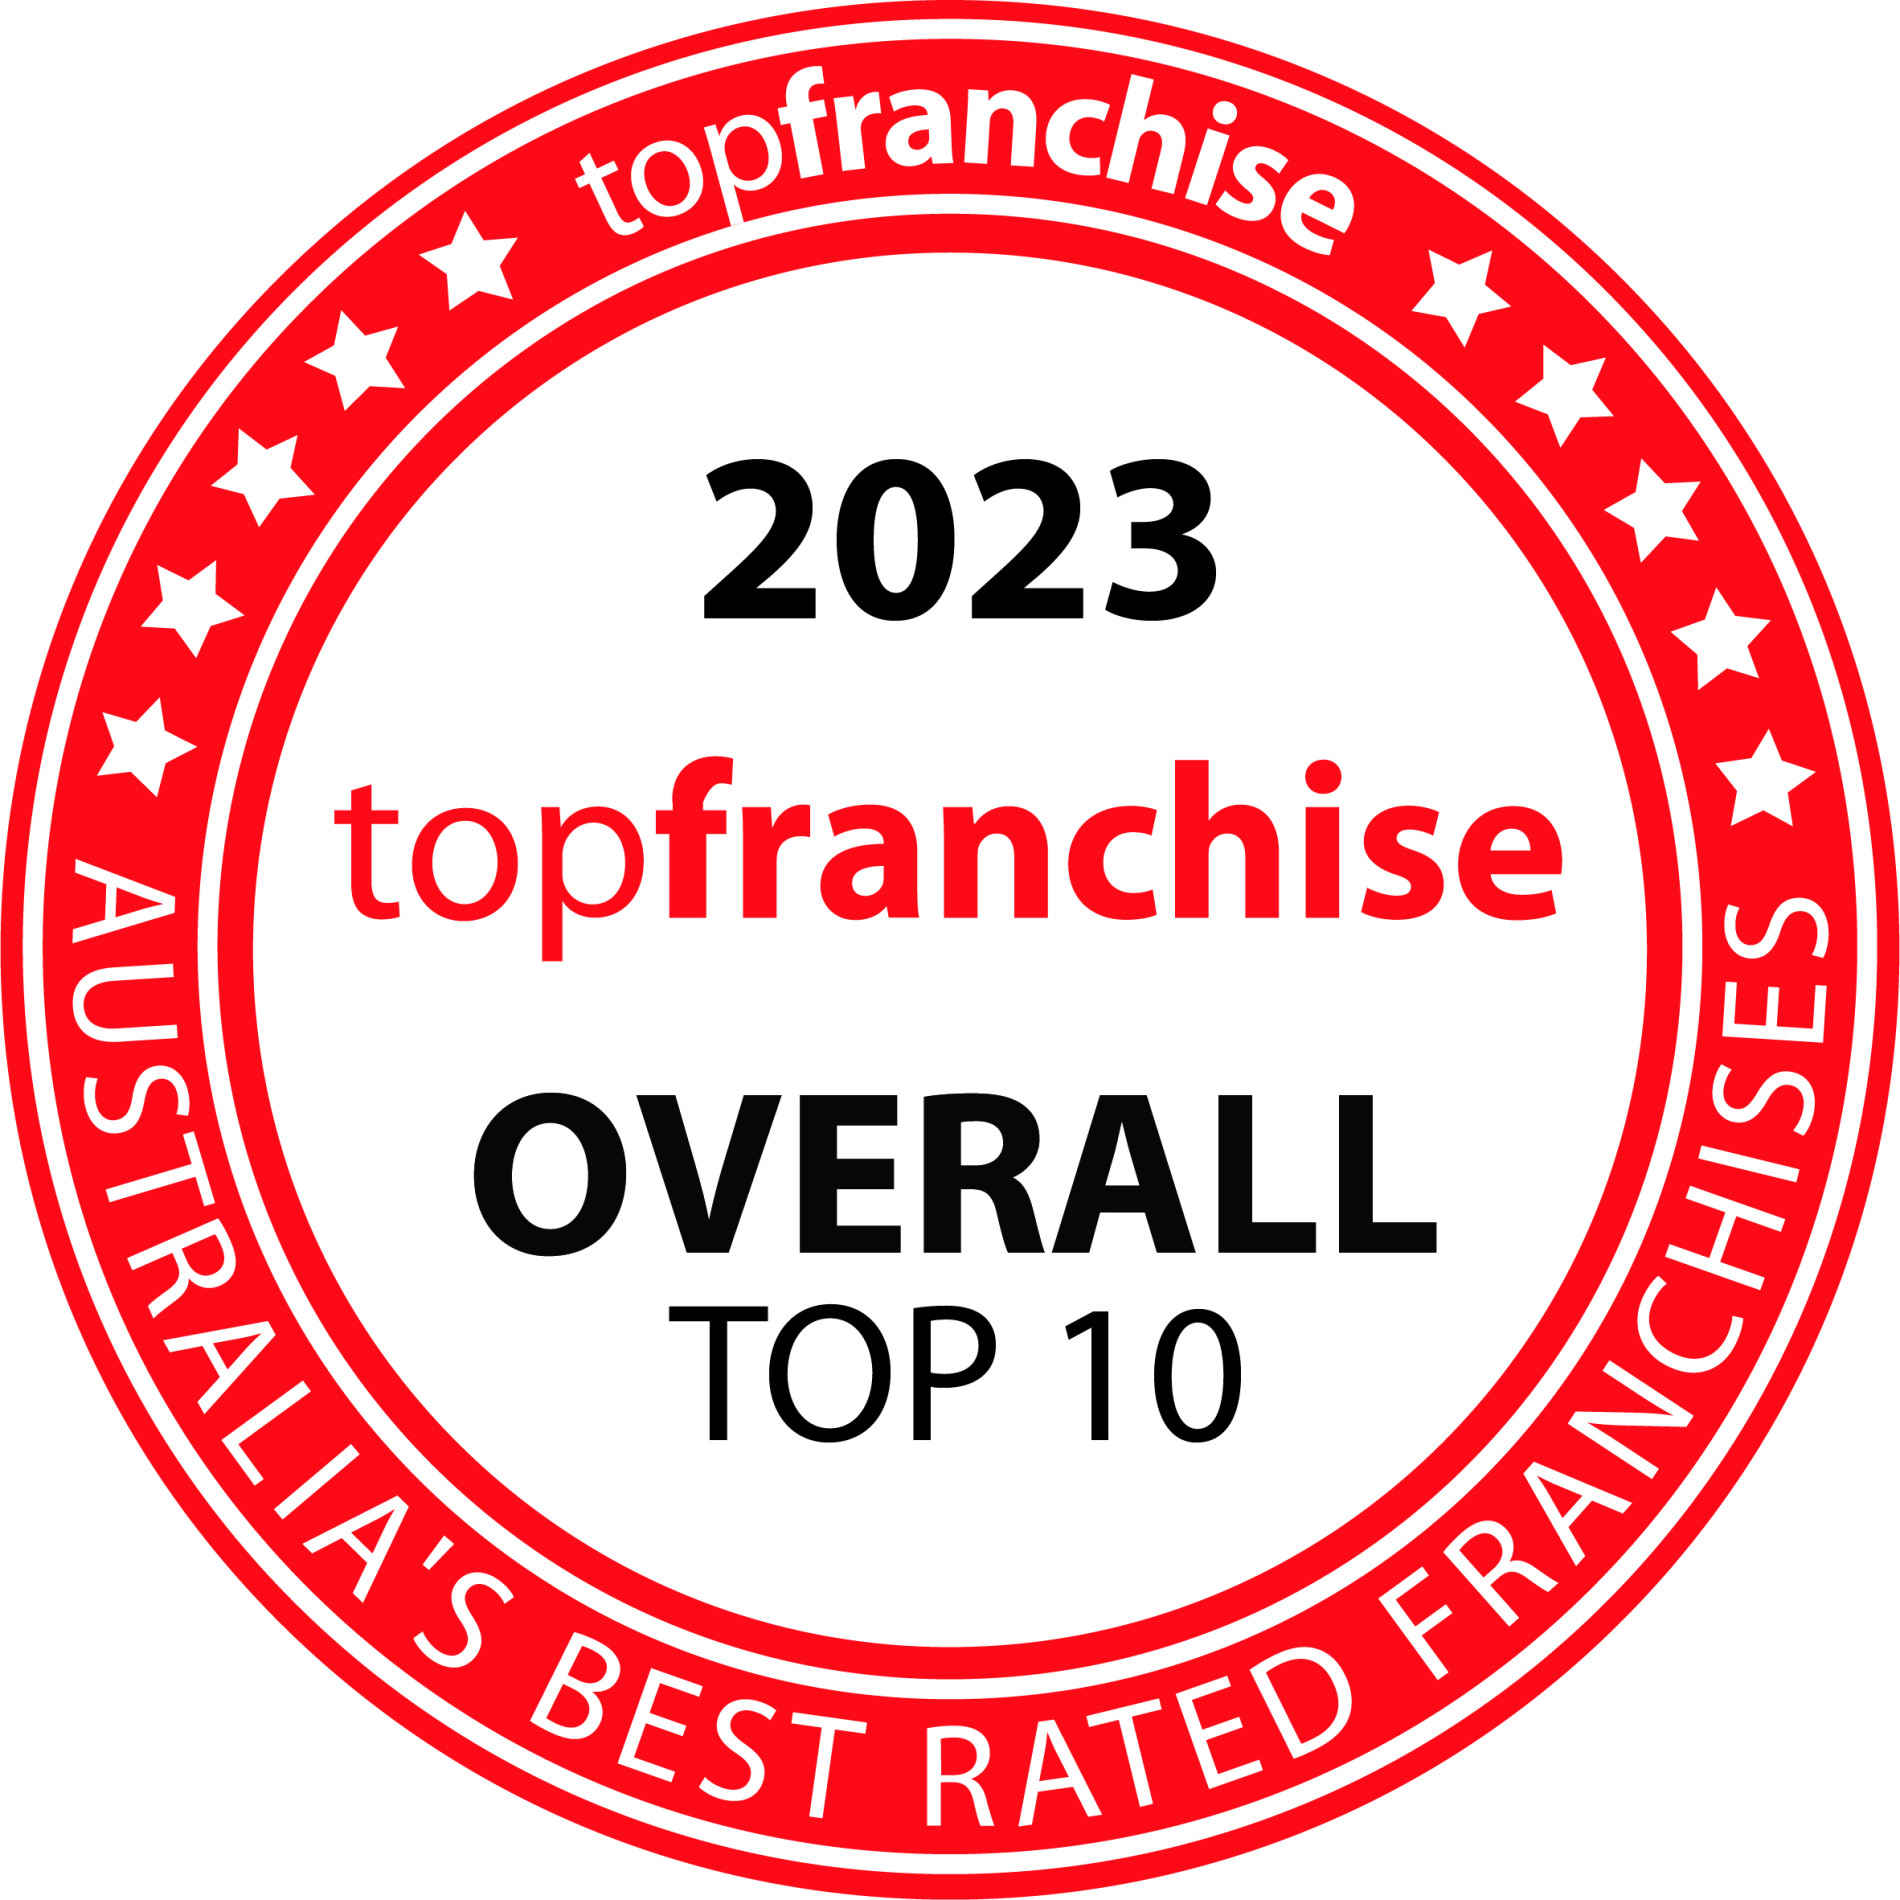 Topfranchise overall top 10 Australia's best Rated Franchises 2023